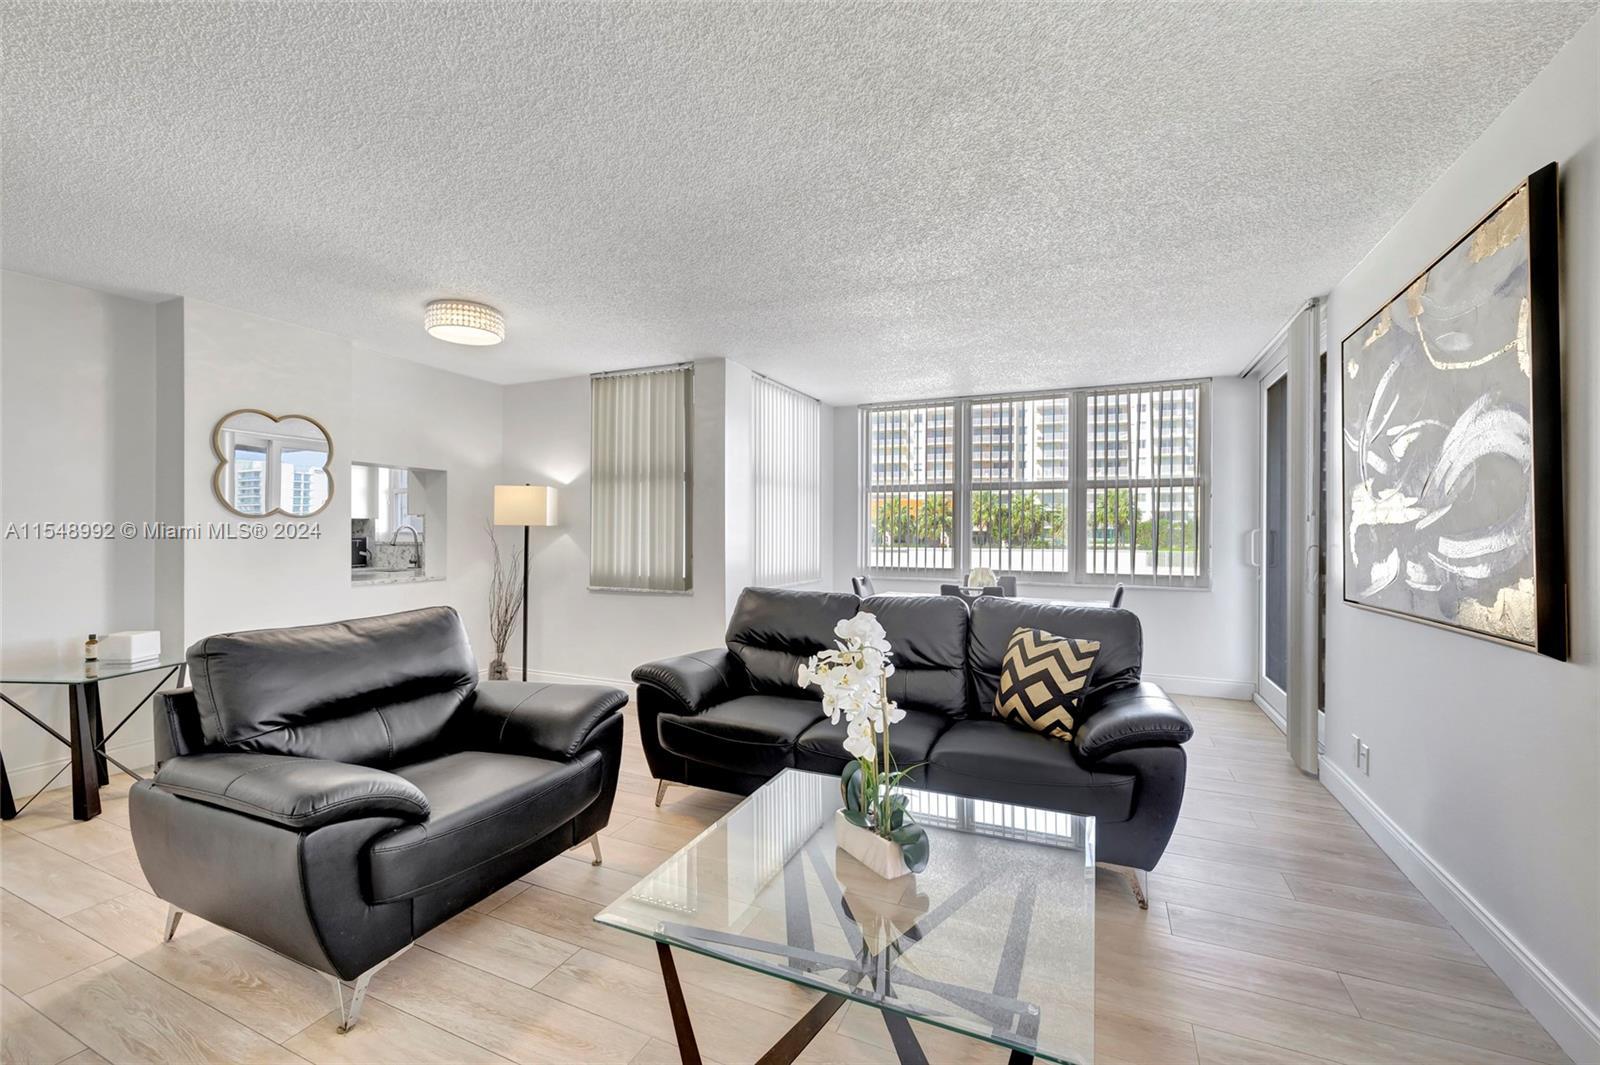 *** Excellent Price *** This spacious corner unit is situated in the heart of Fort Lauderdale, just 